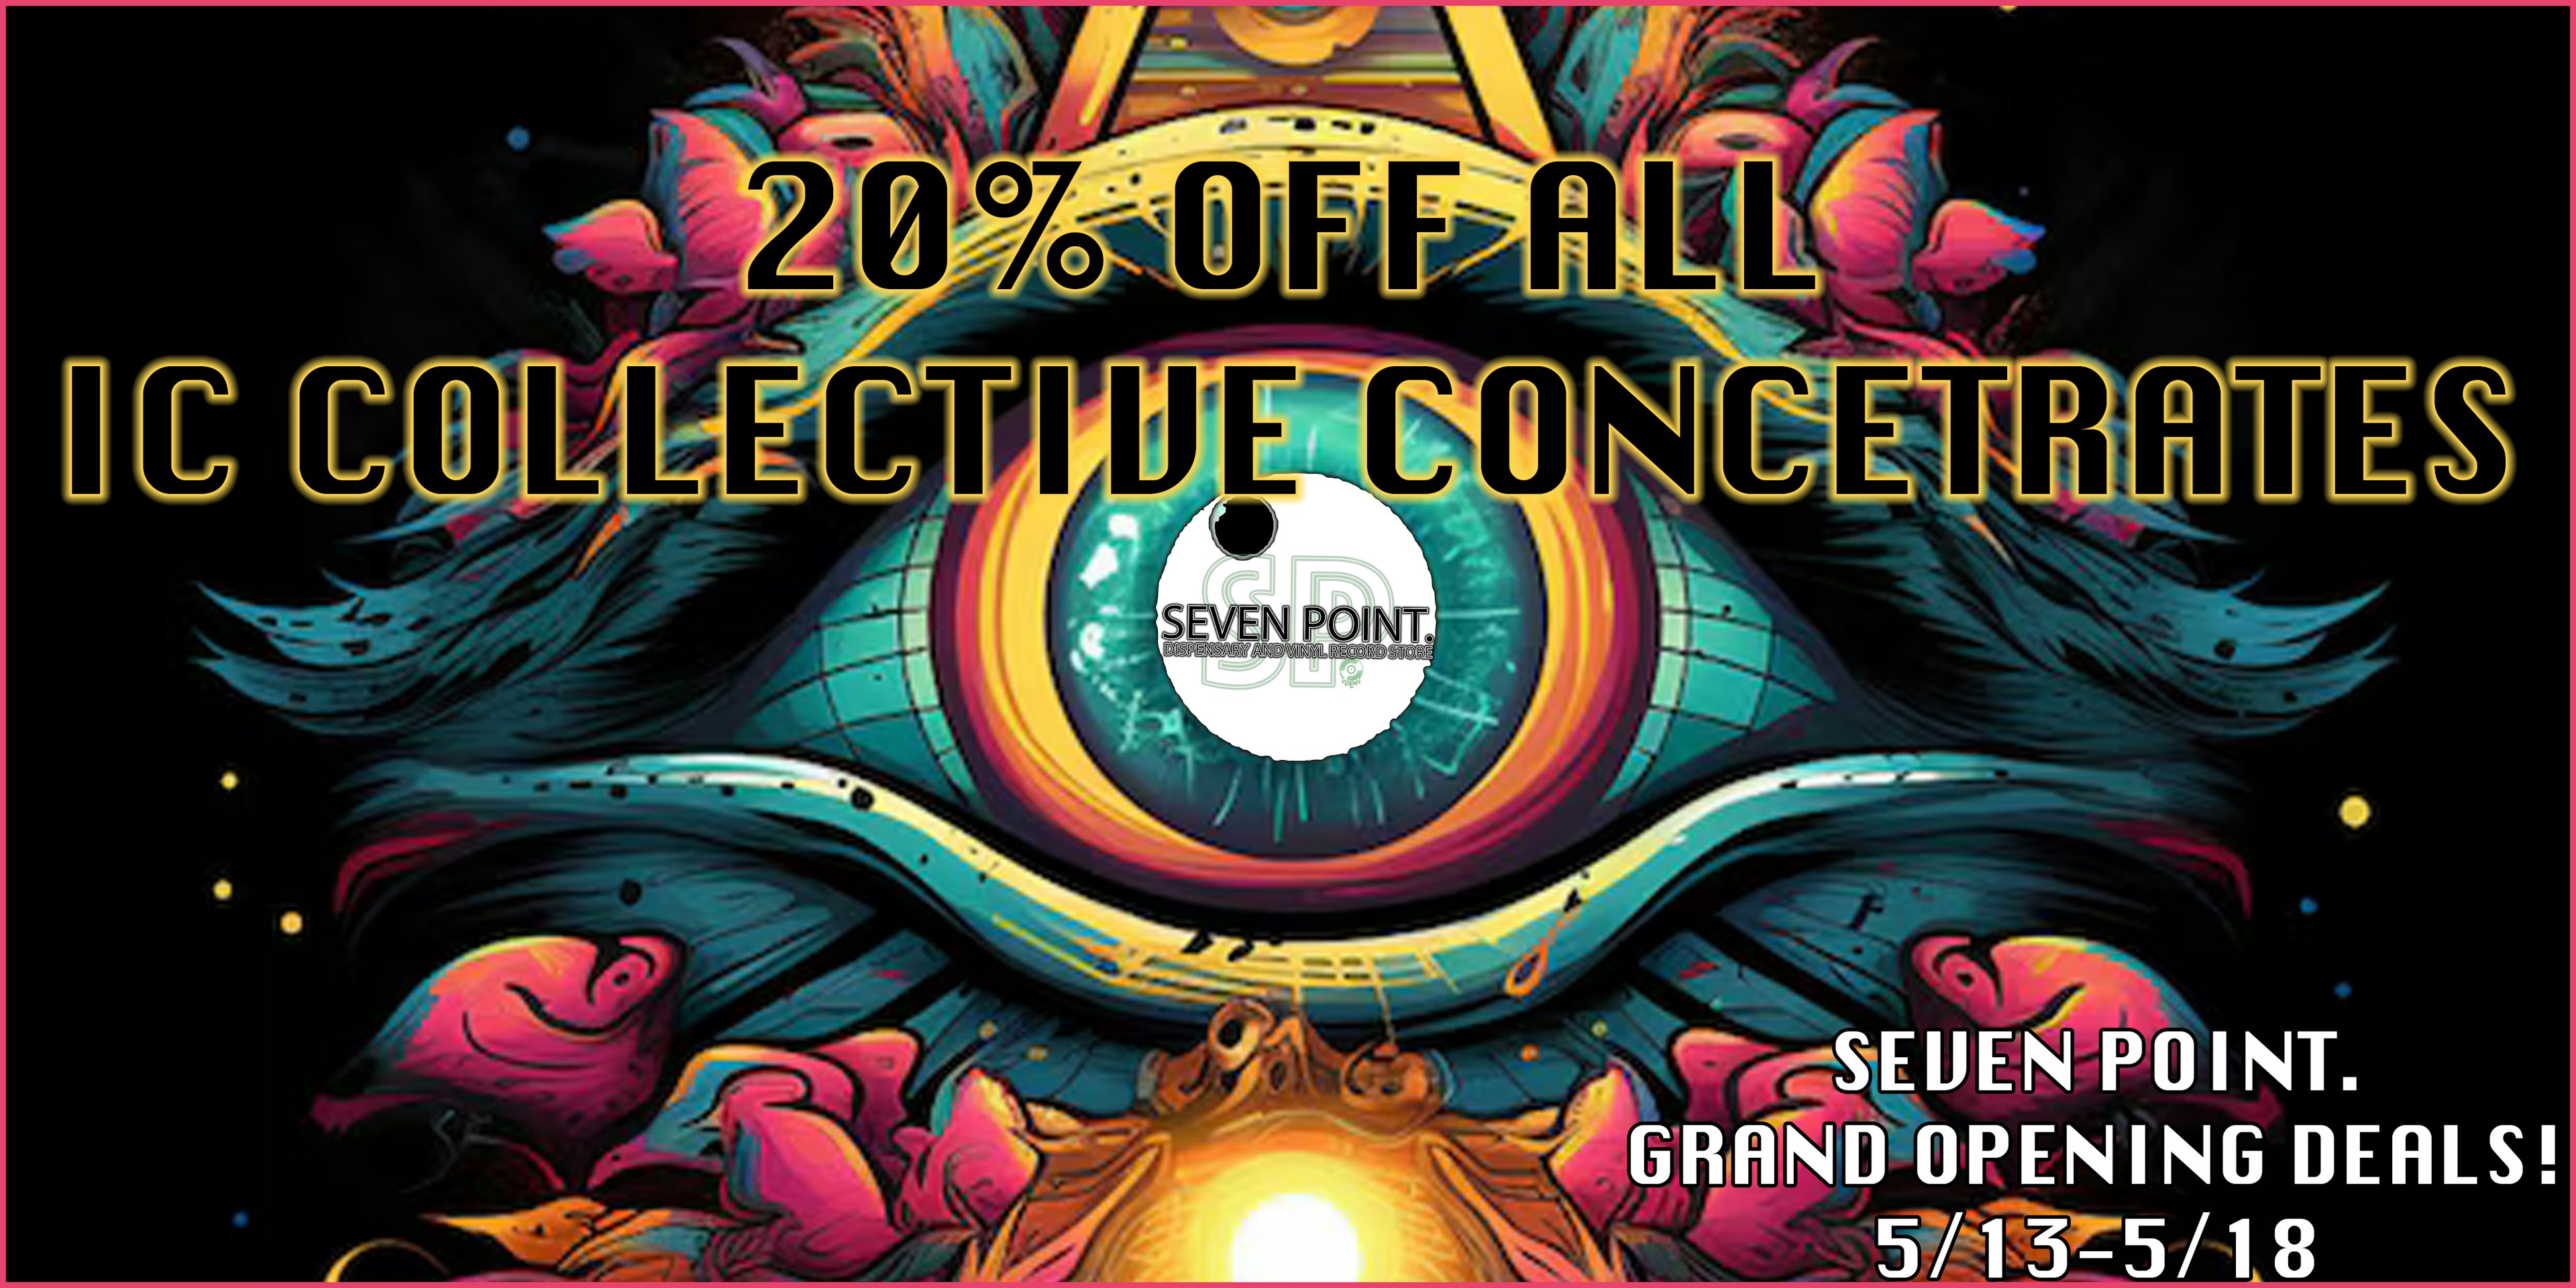 IC COLLECTIVE CONCENTRATES 20% OFF